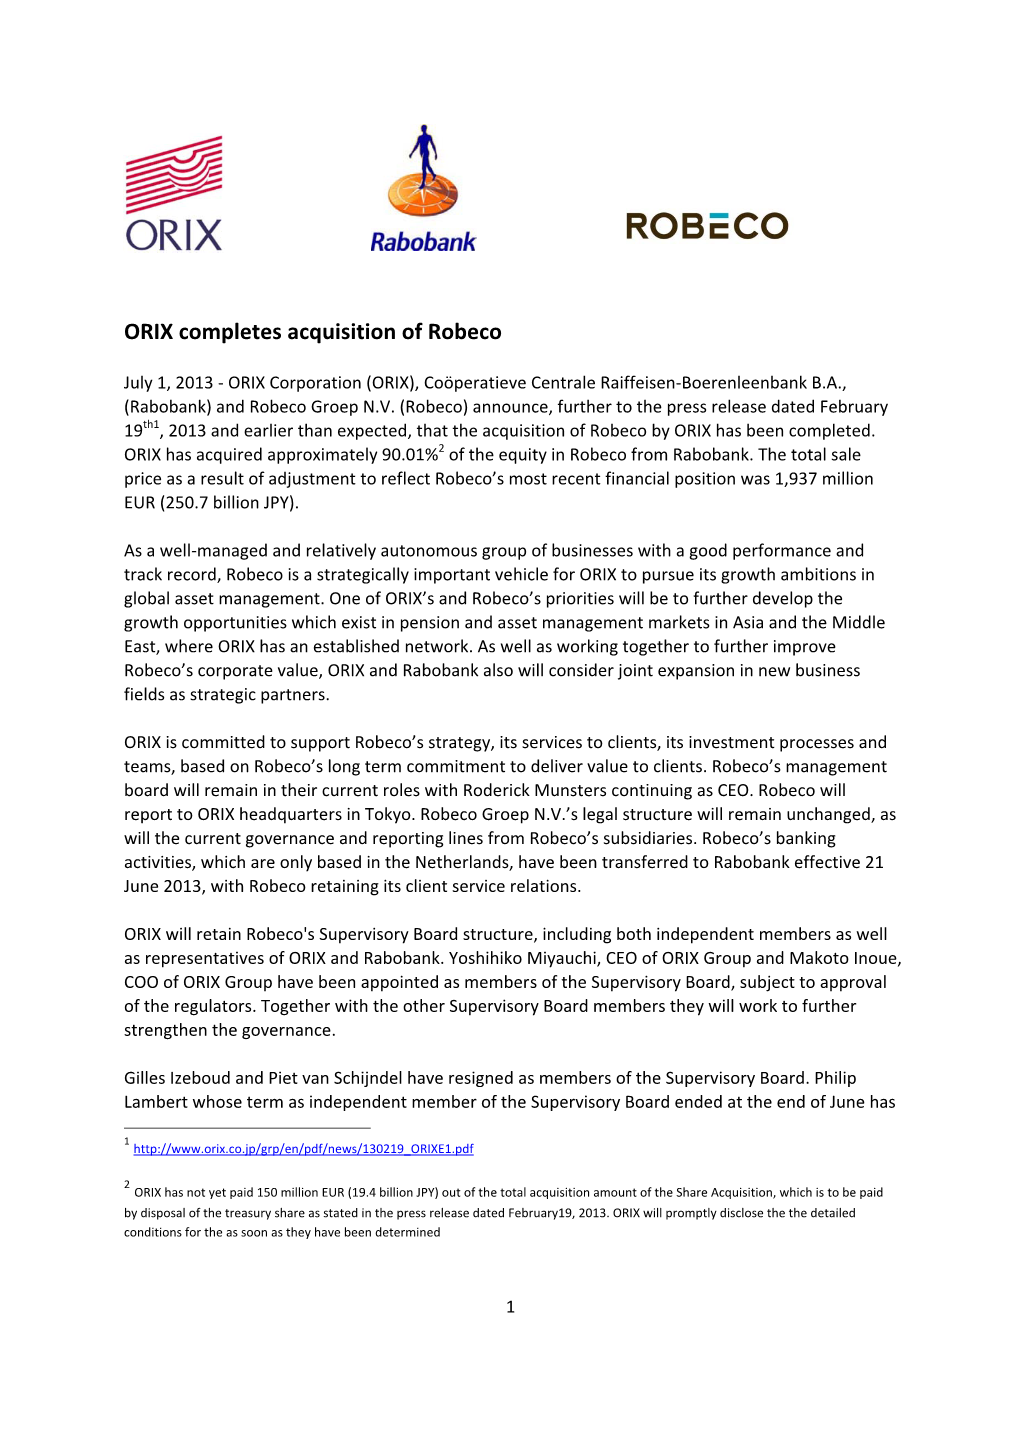 ORIX Completes Acquisition of Robeco